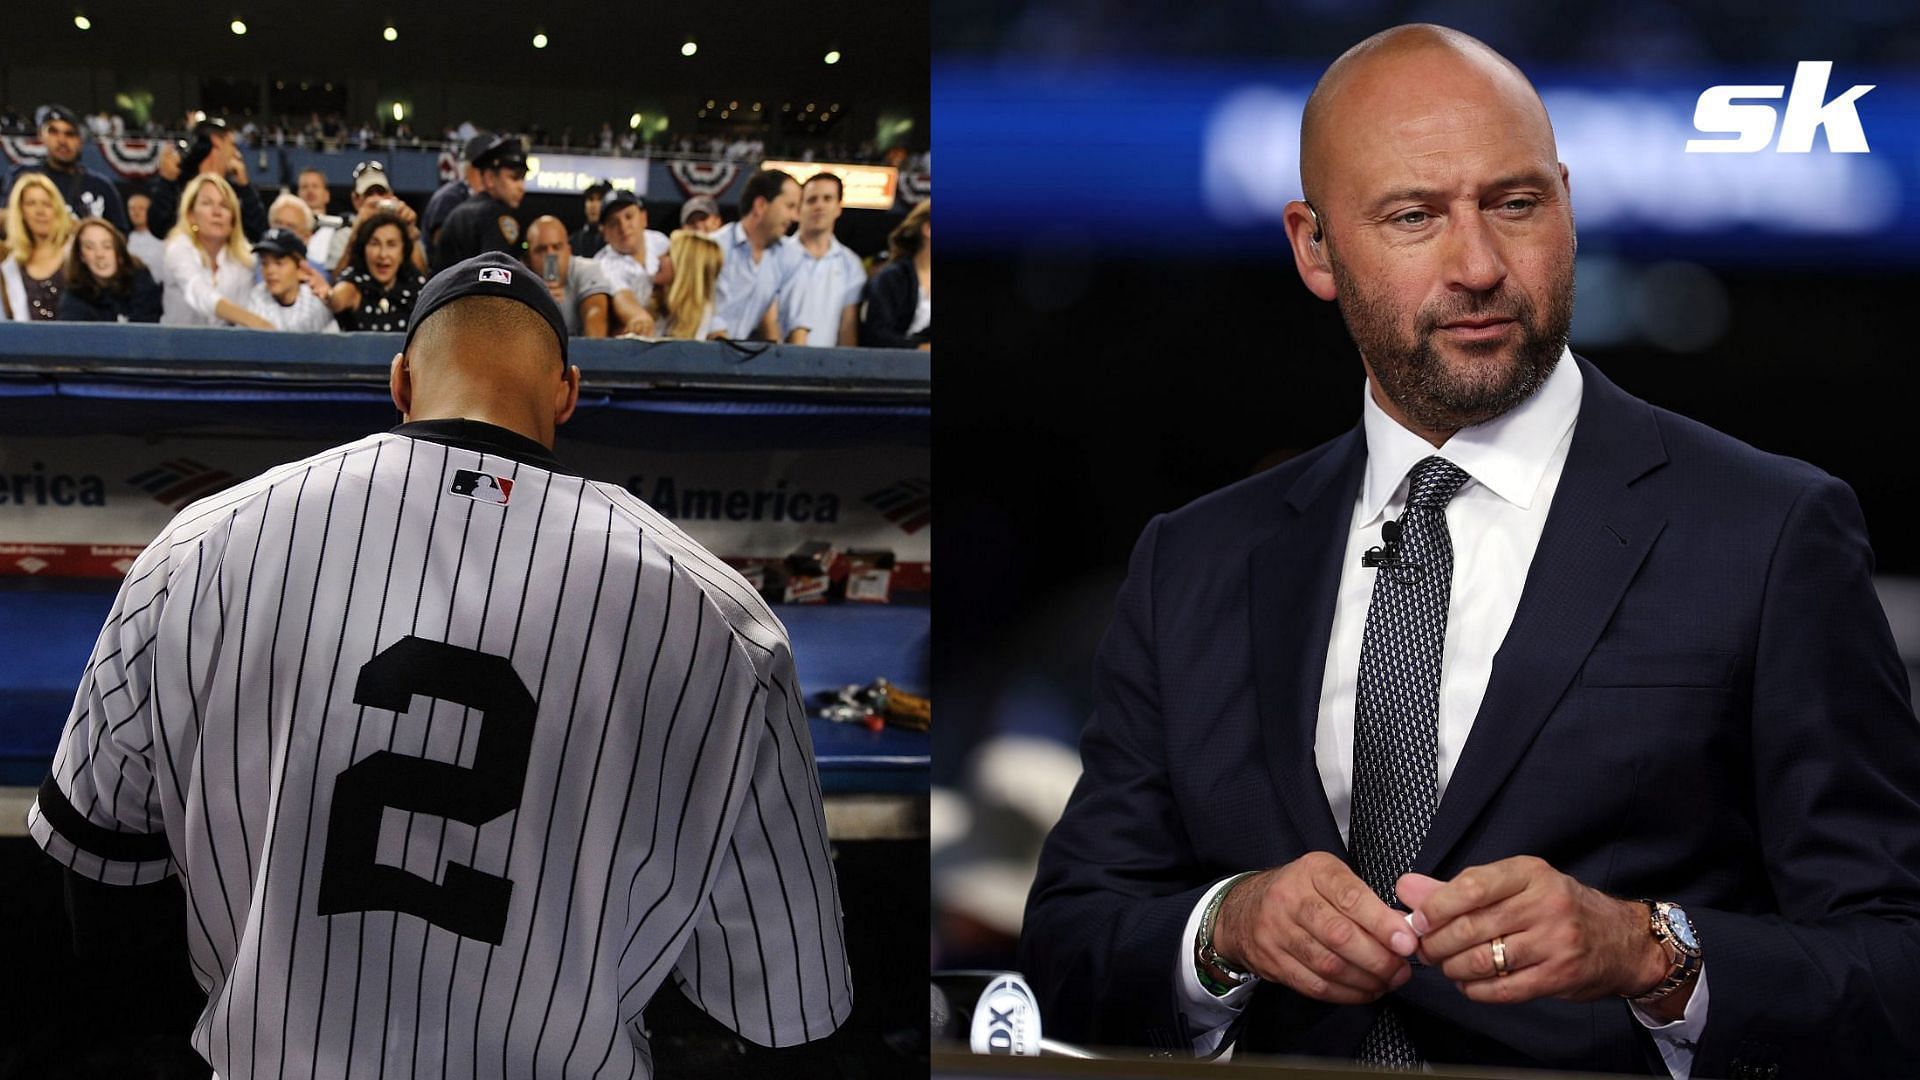 One lucky fan will now meet Derek Jeter after entering a contest from the telecommunications company Optimum